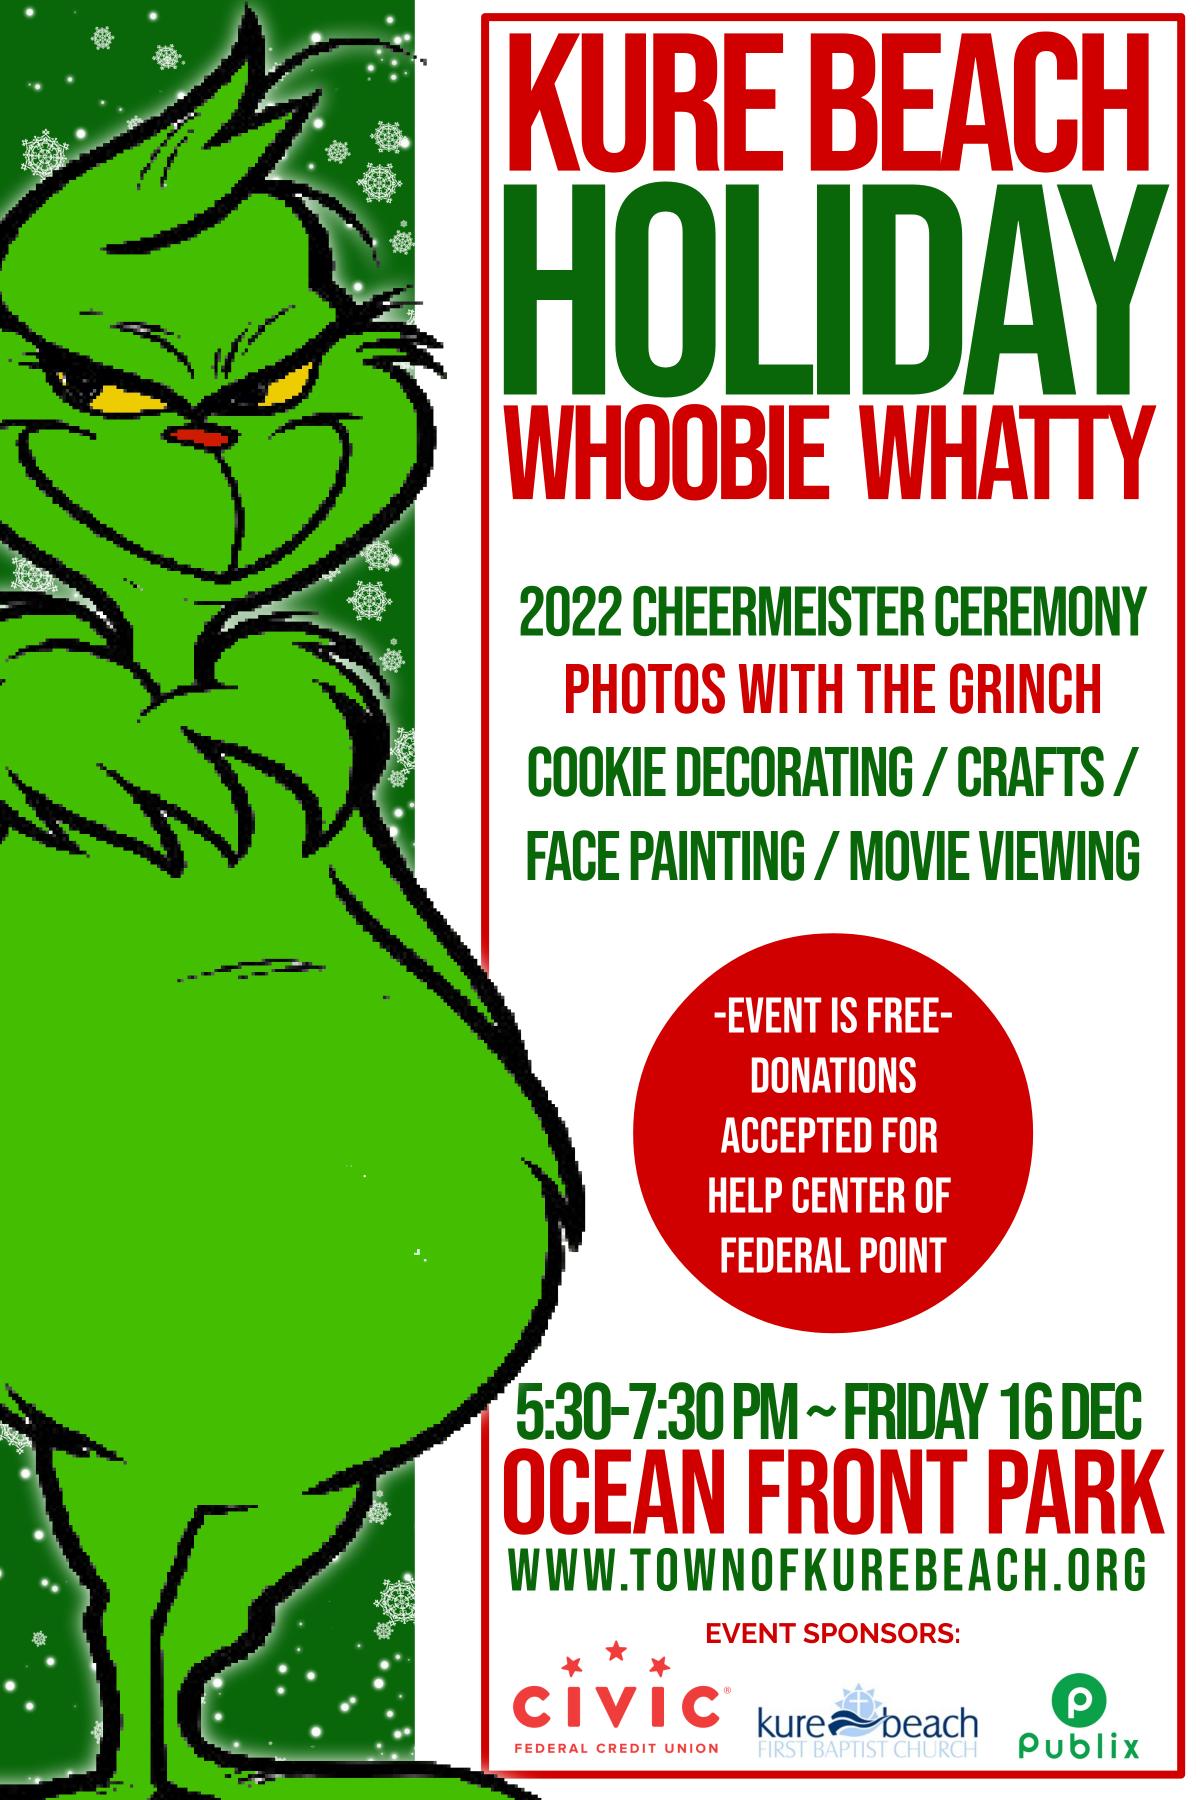 image of the grinch, smirking, next to the event details written out